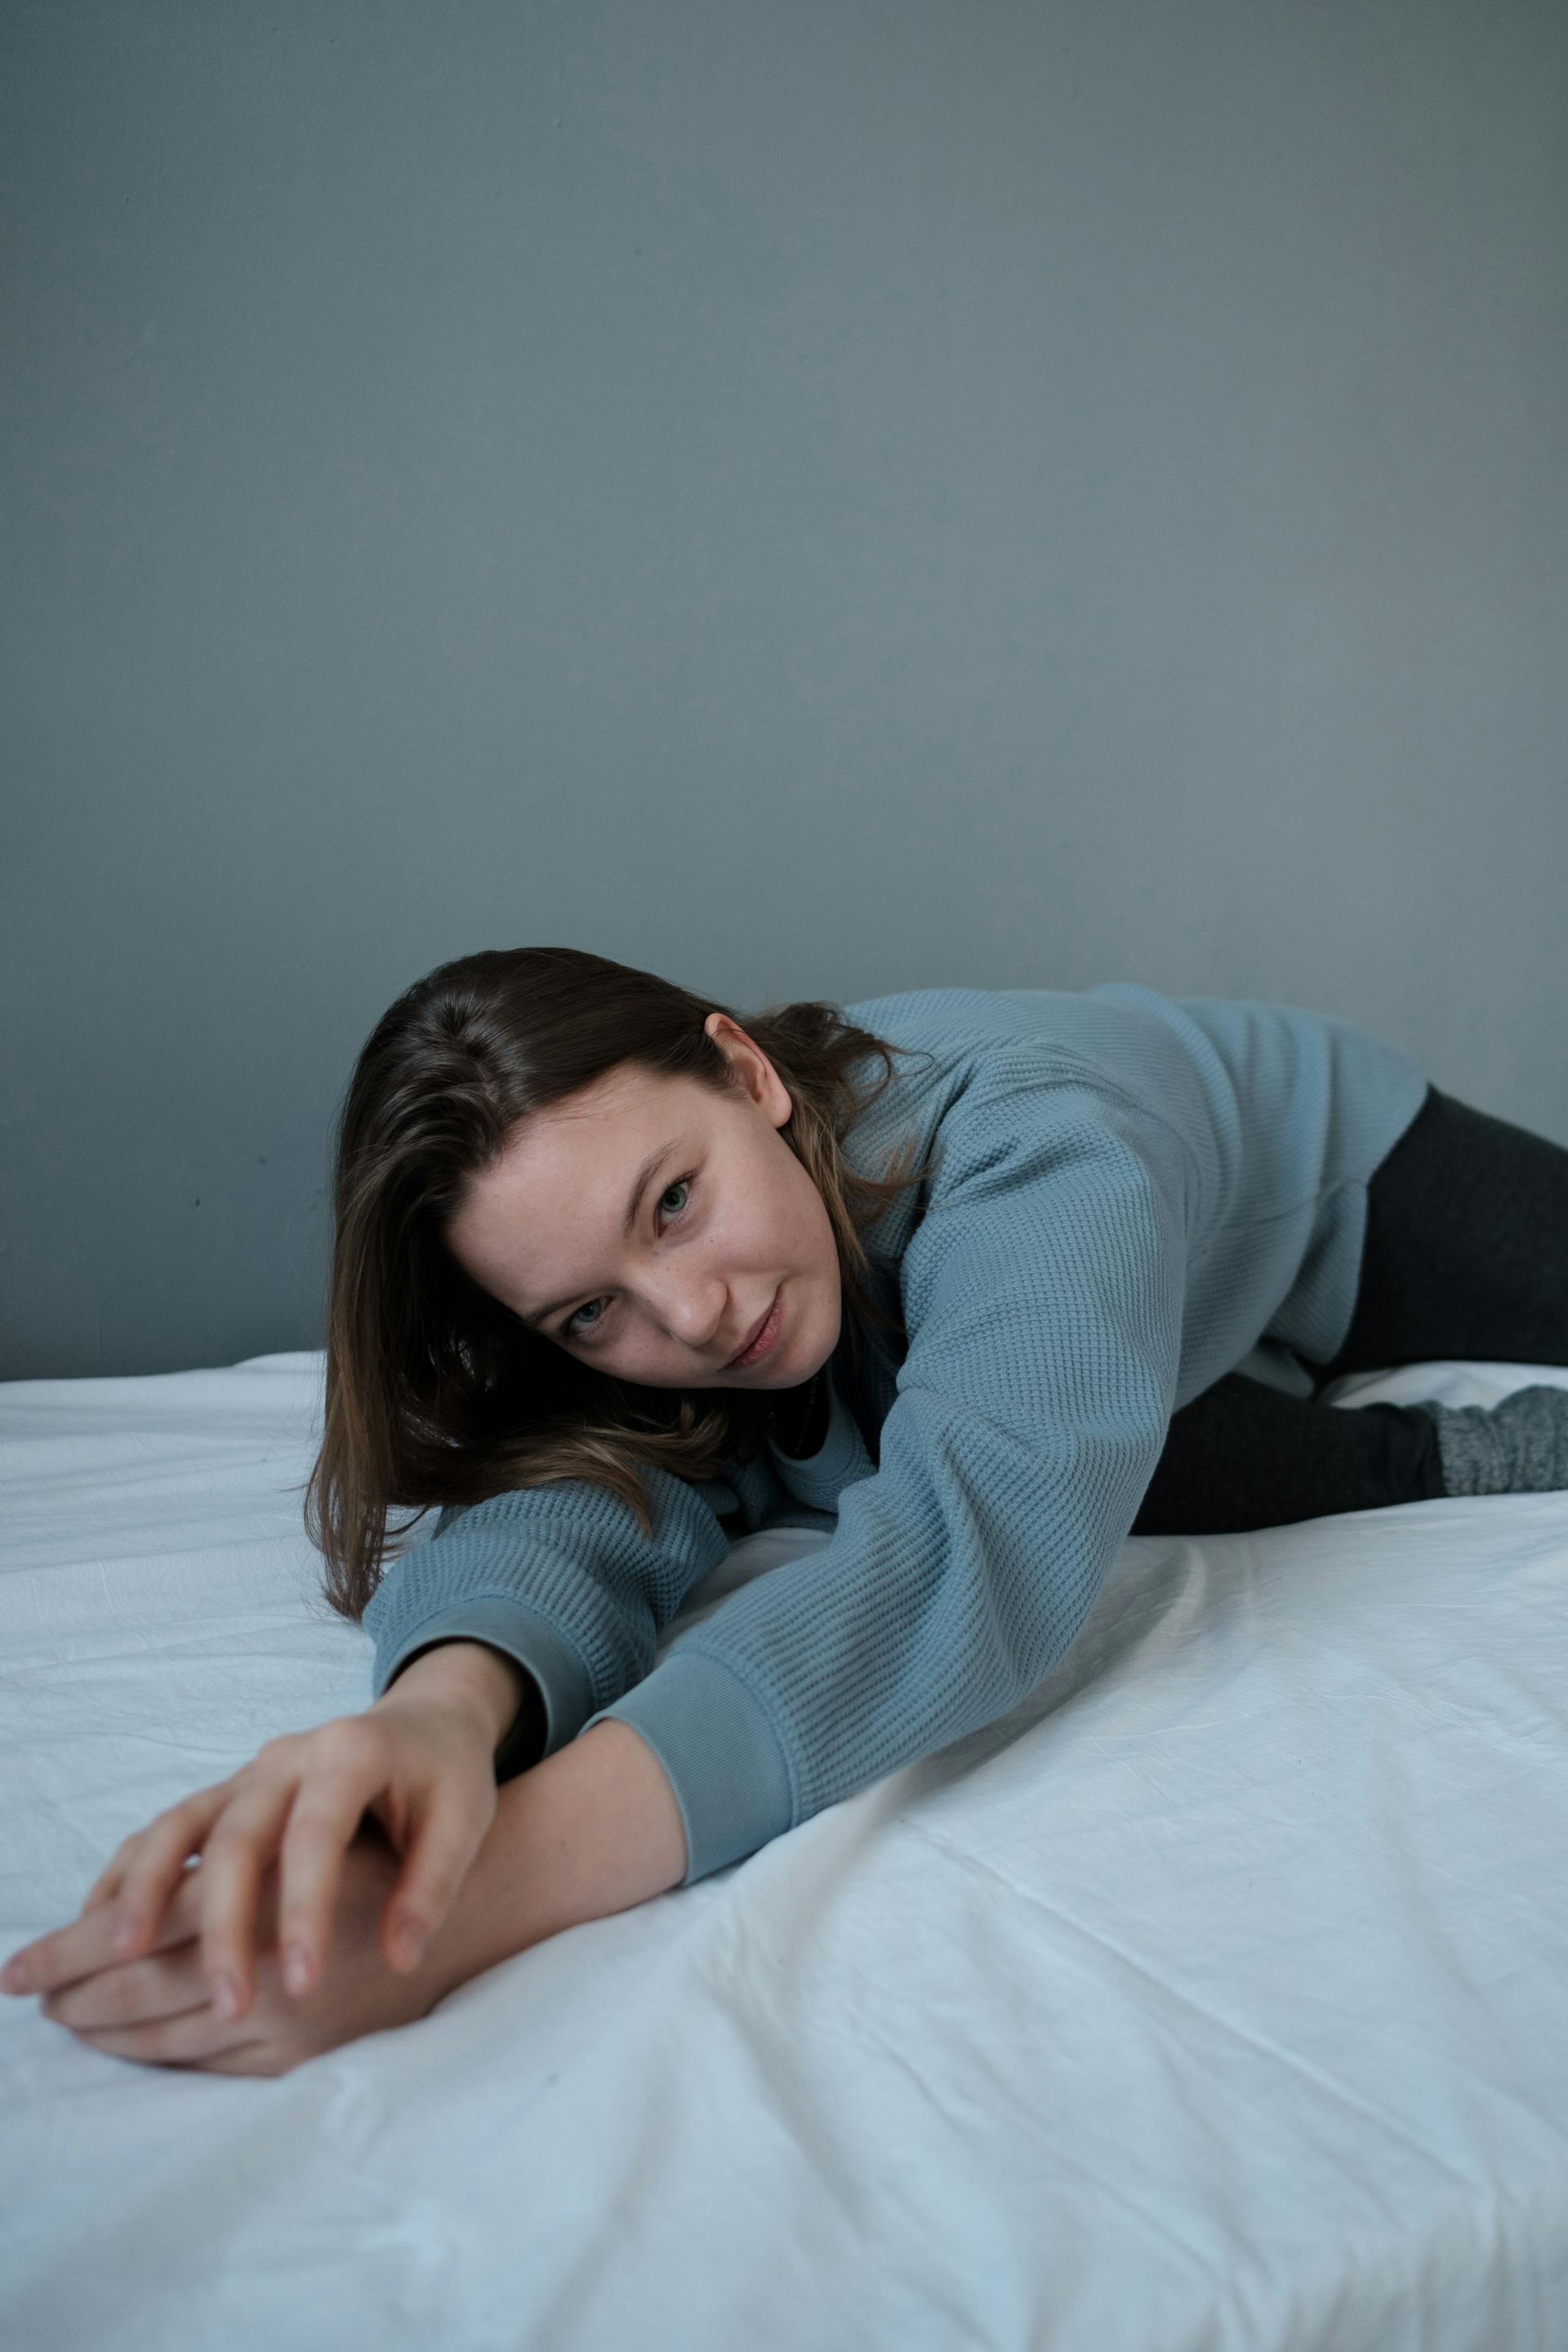 A teenage girl lying on an unmade bed | Source: Pexels